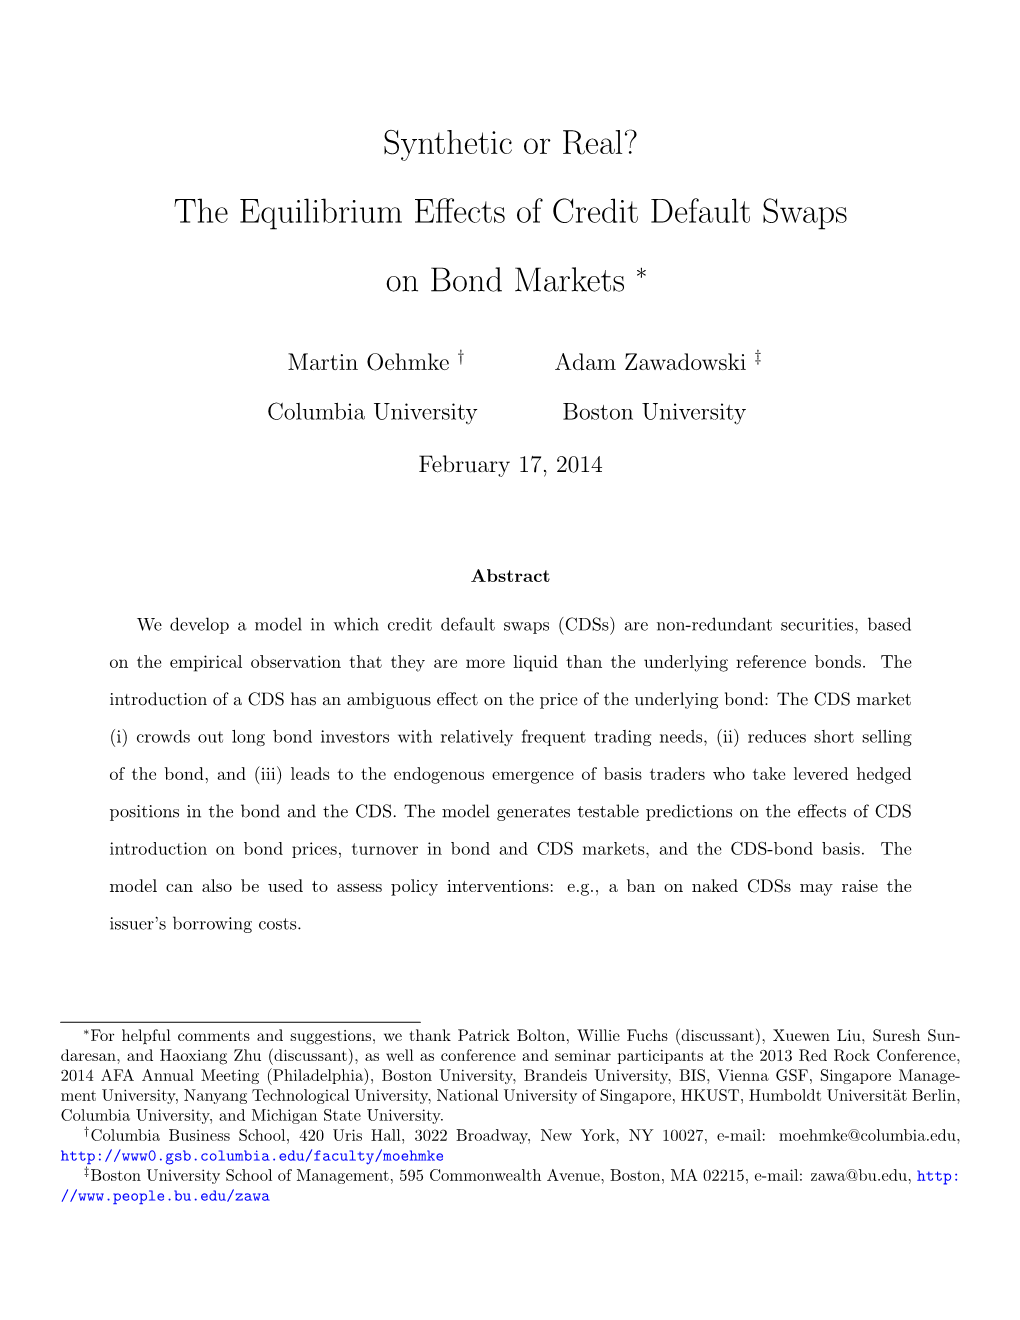 The Equilibrium Effects of Credit Default Swaps on Bond Markets